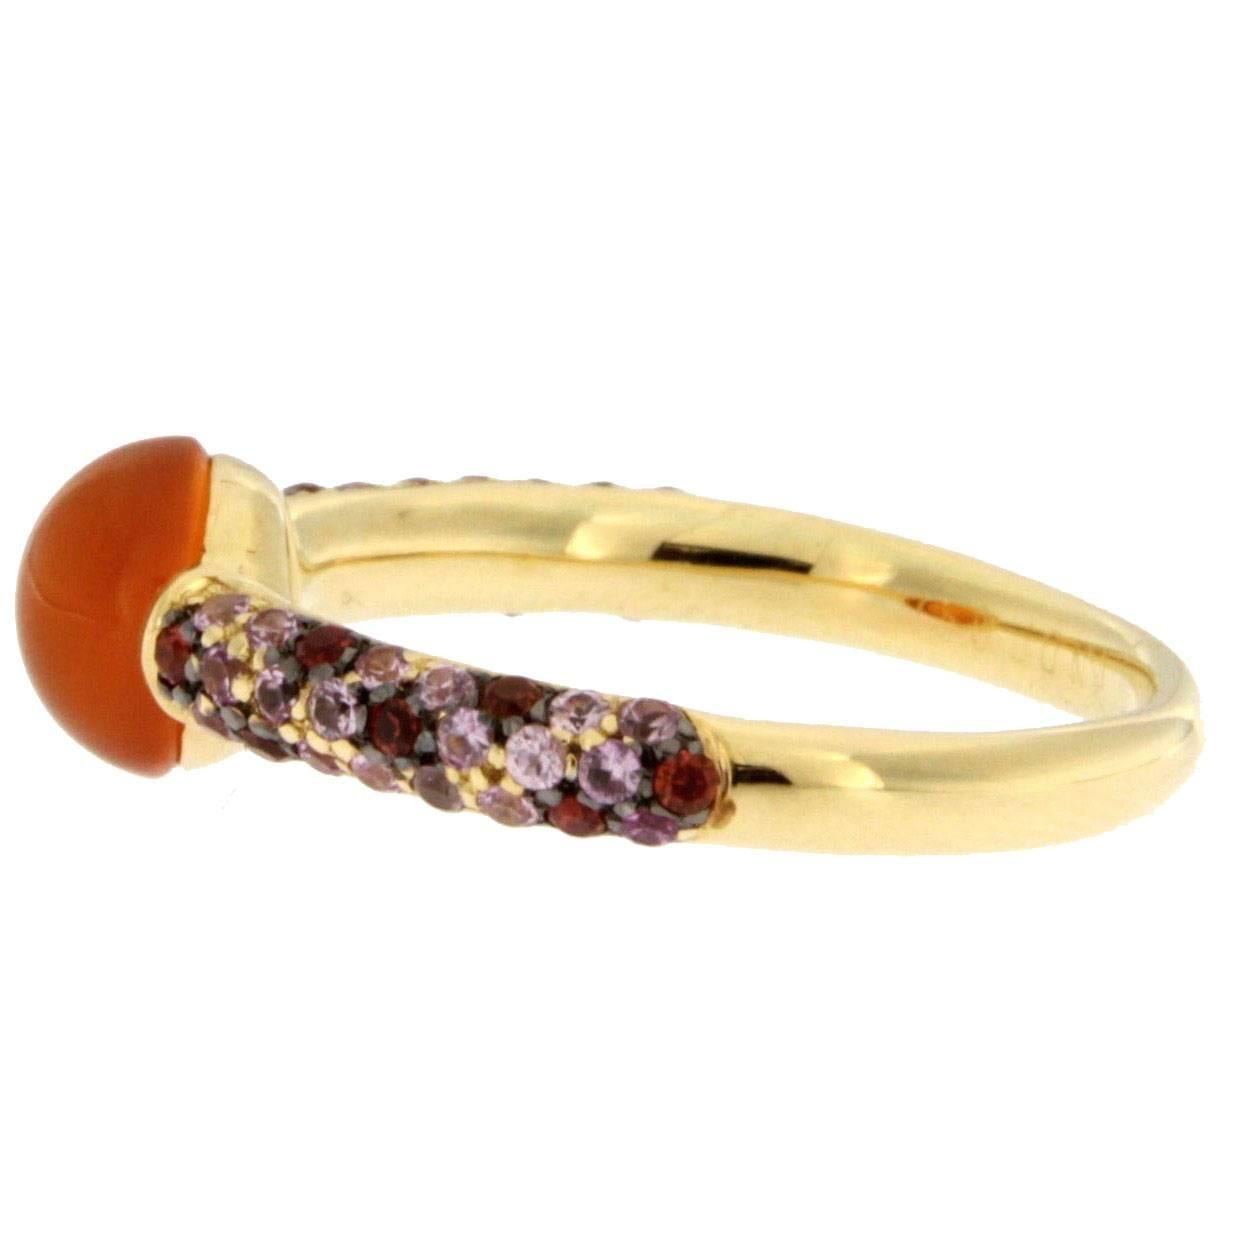 Jona design collection, hand crafted in Italy, 18 karat yellow gold ring centering a cabochon carnelian weighting 1 carat. Shoulders are set with 0.48 carats of orange sapphires and 1.02 carats of pink sapphires. 
Ring size US. 6.8, can be sized to